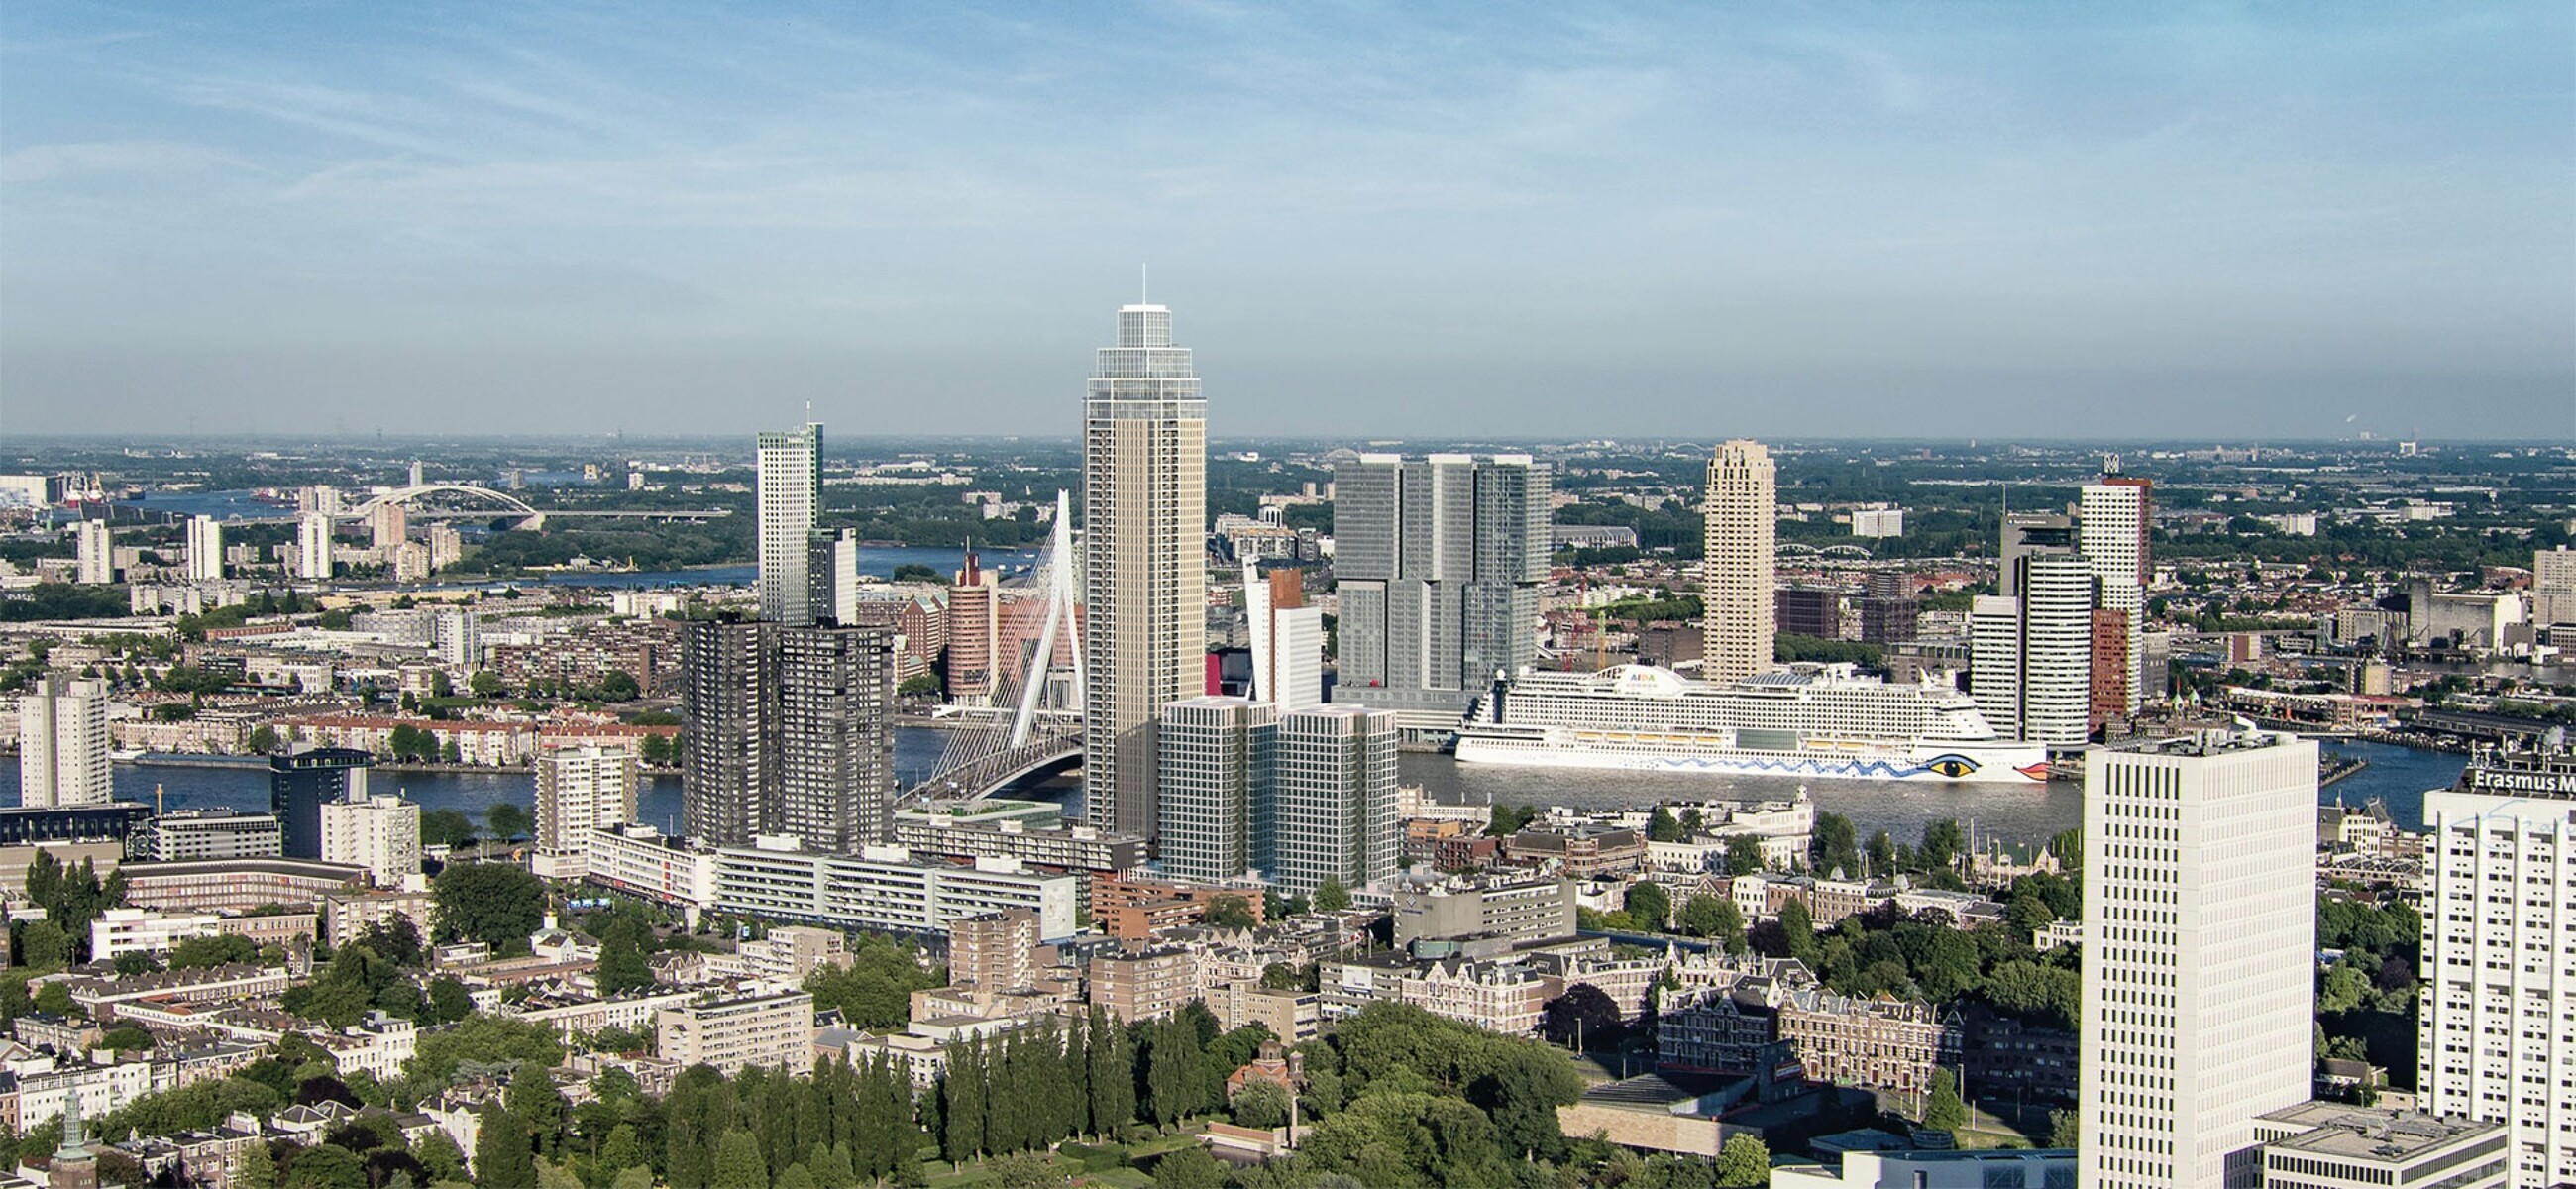 De Zalmhaven is equipped with KSB pumps and is the tallest building in the Benelux countries. 